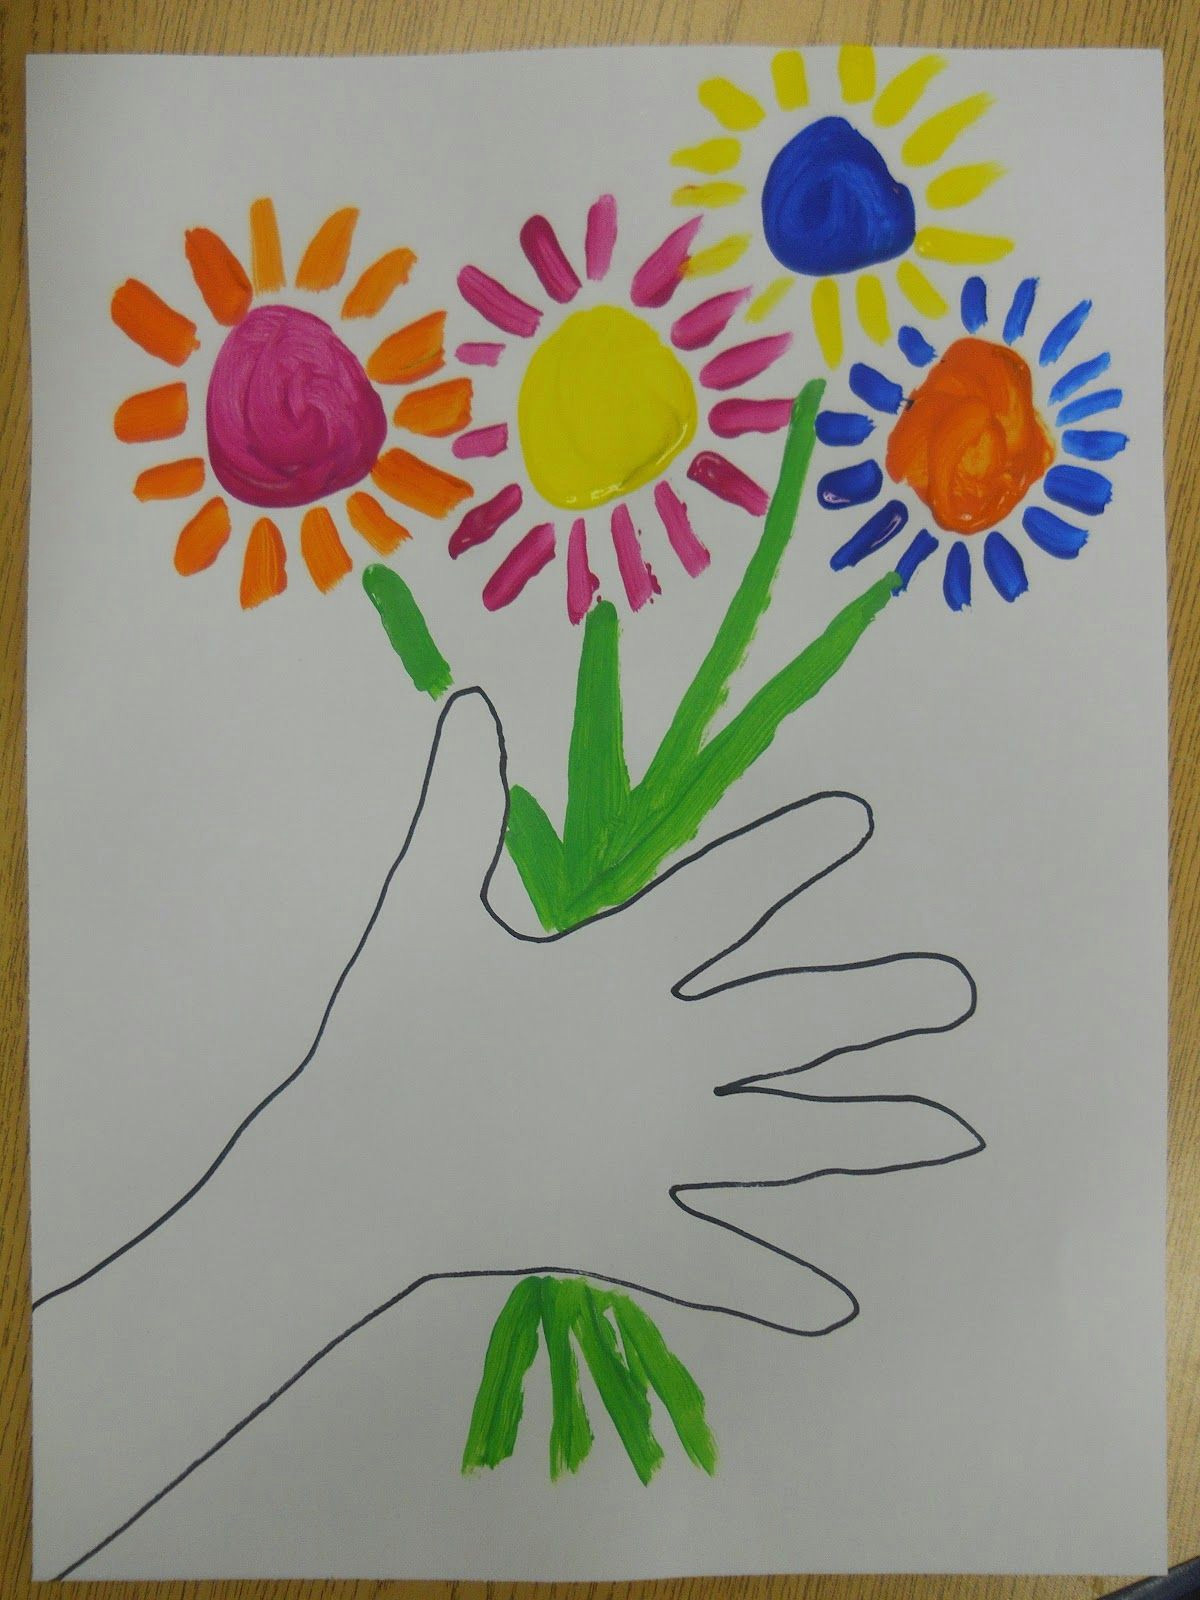 Drawing Flowers for Mother S Day Painting Idea Mother S Day Pinterest Picasso Flowers